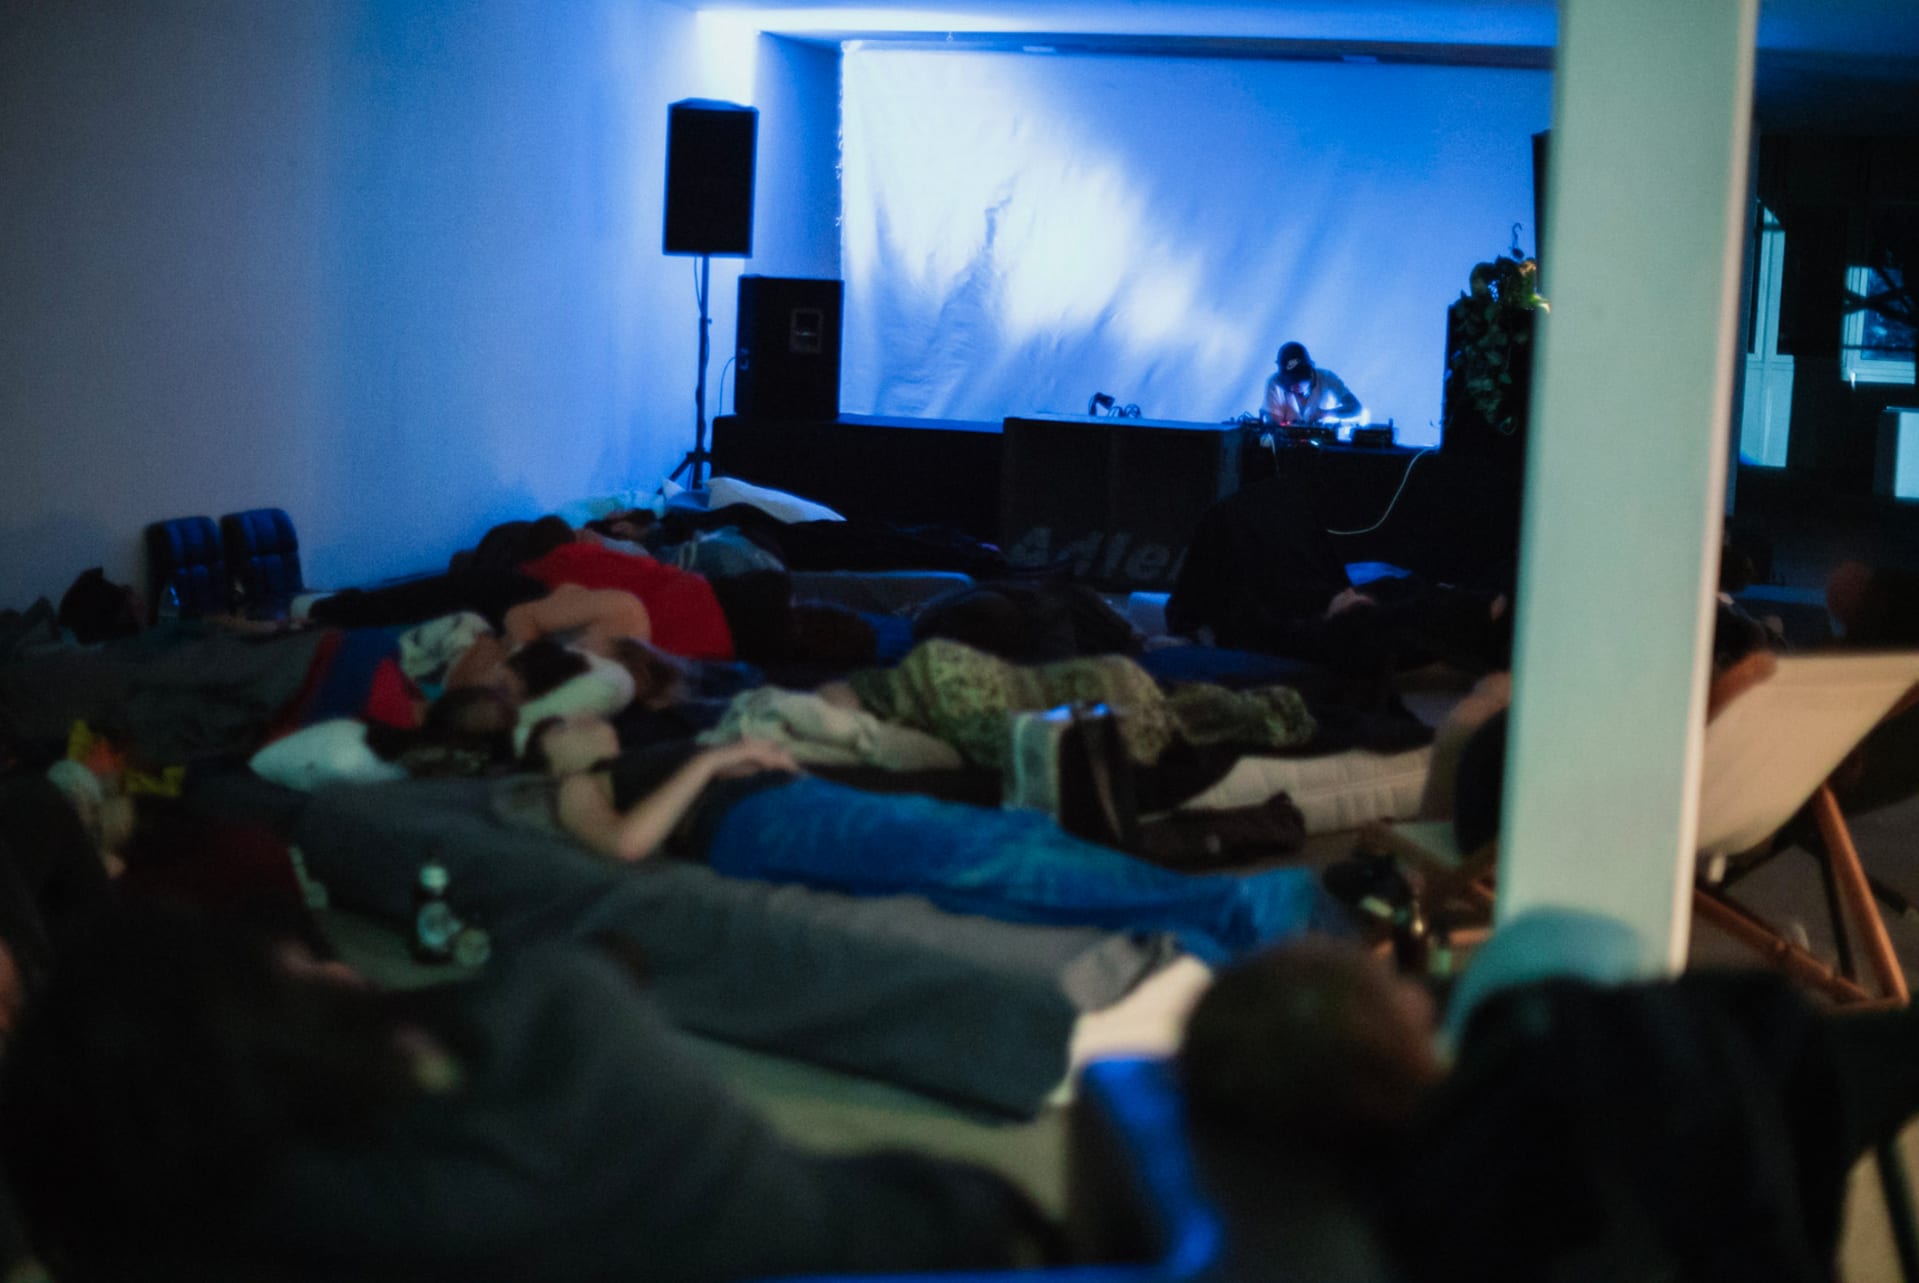 Sleepover Drone Show Review